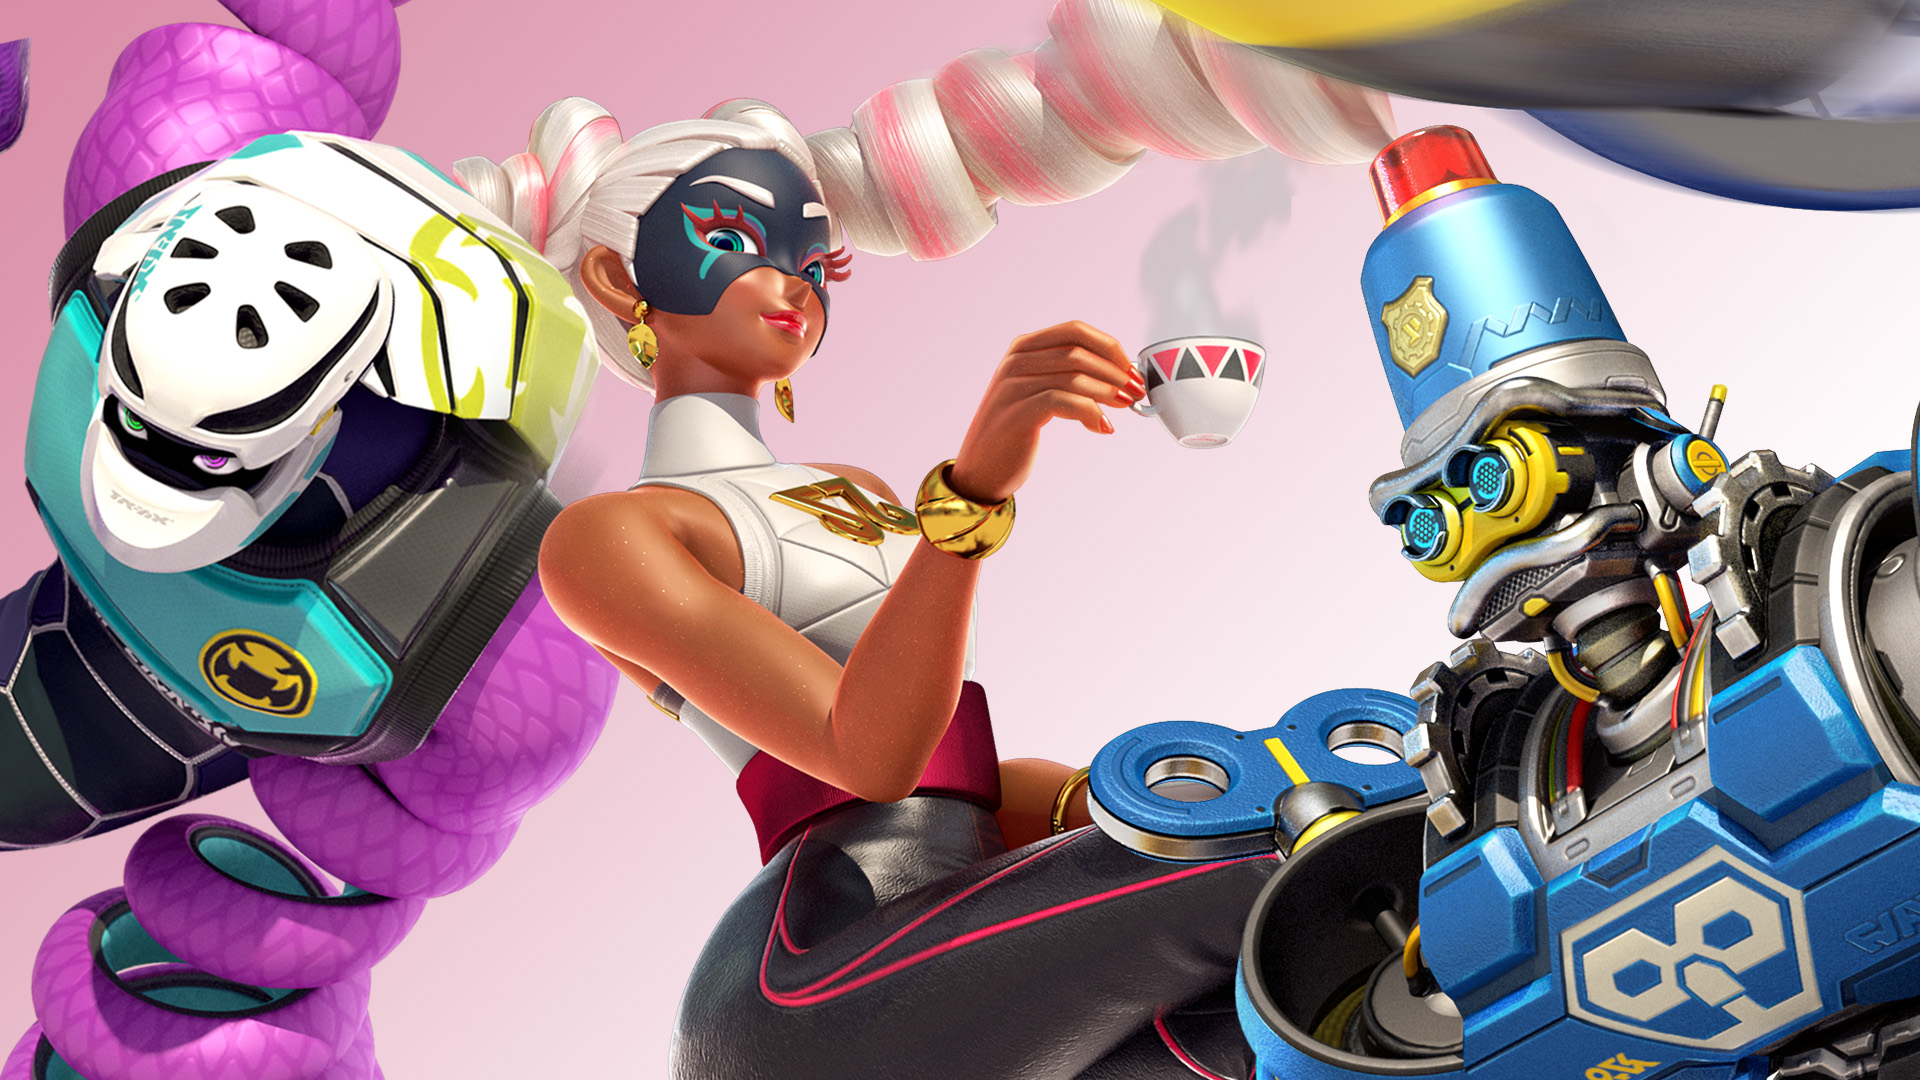 Byte Arms Kid Cobra Arms Twintelle Arms 1920x1080